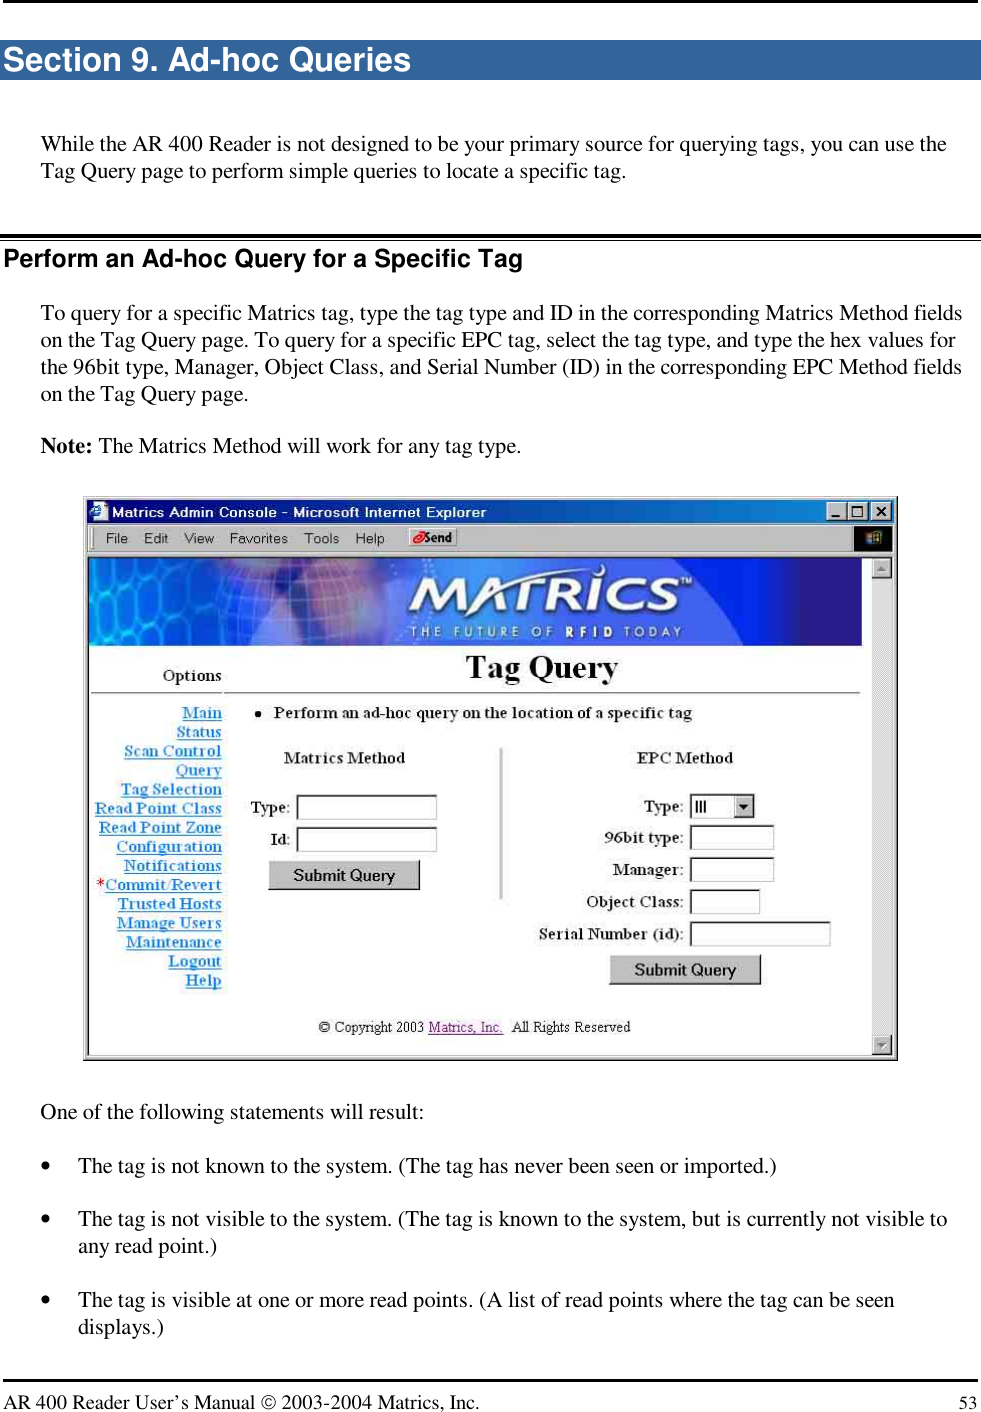   AR 400 Reader User’s Manual  2003-2004 Matrics, Inc.  53 Section 9. Ad-hoc Queries While the AR 400 Reader is not designed to be your primary source for querying tags, you can use the Tag Query page to perform simple queries to locate a specific tag. Perform an Ad-hoc Query for a Specific Tag To query for a specific Matrics tag, type the tag type and ID in the corresponding Matrics Method fields on the Tag Query page. To query for a specific EPC tag, select the tag type, and type the hex values for the 96bit type, Manager, Object Class, and Serial Number (ID) in the corresponding EPC Method fields on the Tag Query page. Note: The Matrics Method will work for any tag type.  One of the following statements will result: •  The tag is not known to the system. (The tag has never been seen or imported.) •  The tag is not visible to the system. (The tag is known to the system, but is currently not visible to any read point.) •  The tag is visible at one or more read points. (A list of read points where the tag can be seen displays.) 